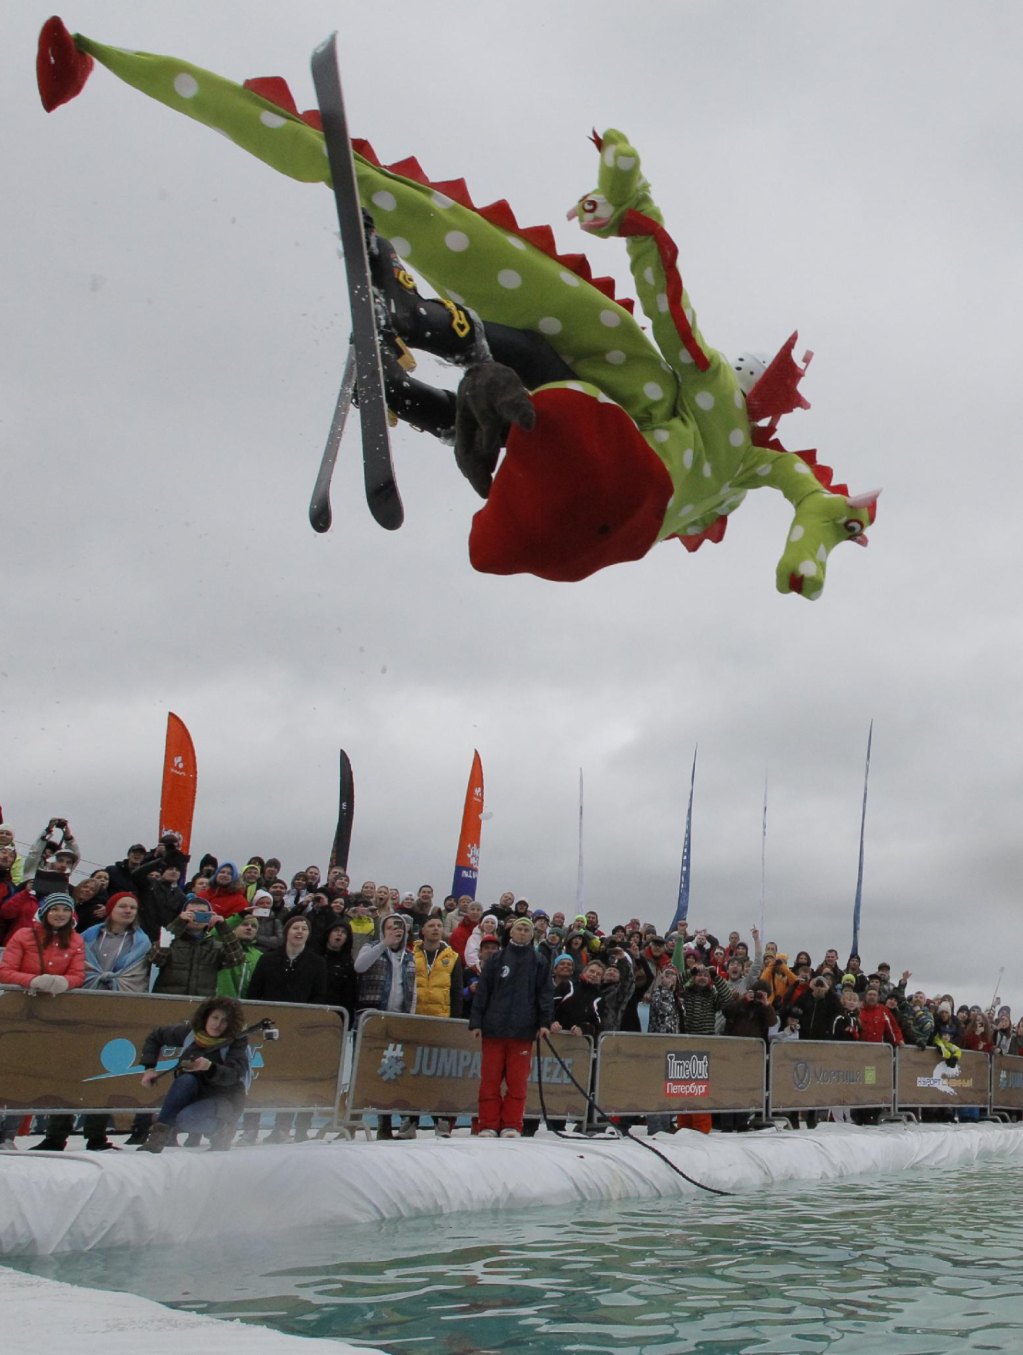 A competitor participates in the 'Red Bull Jump and Freeze фото (photo)